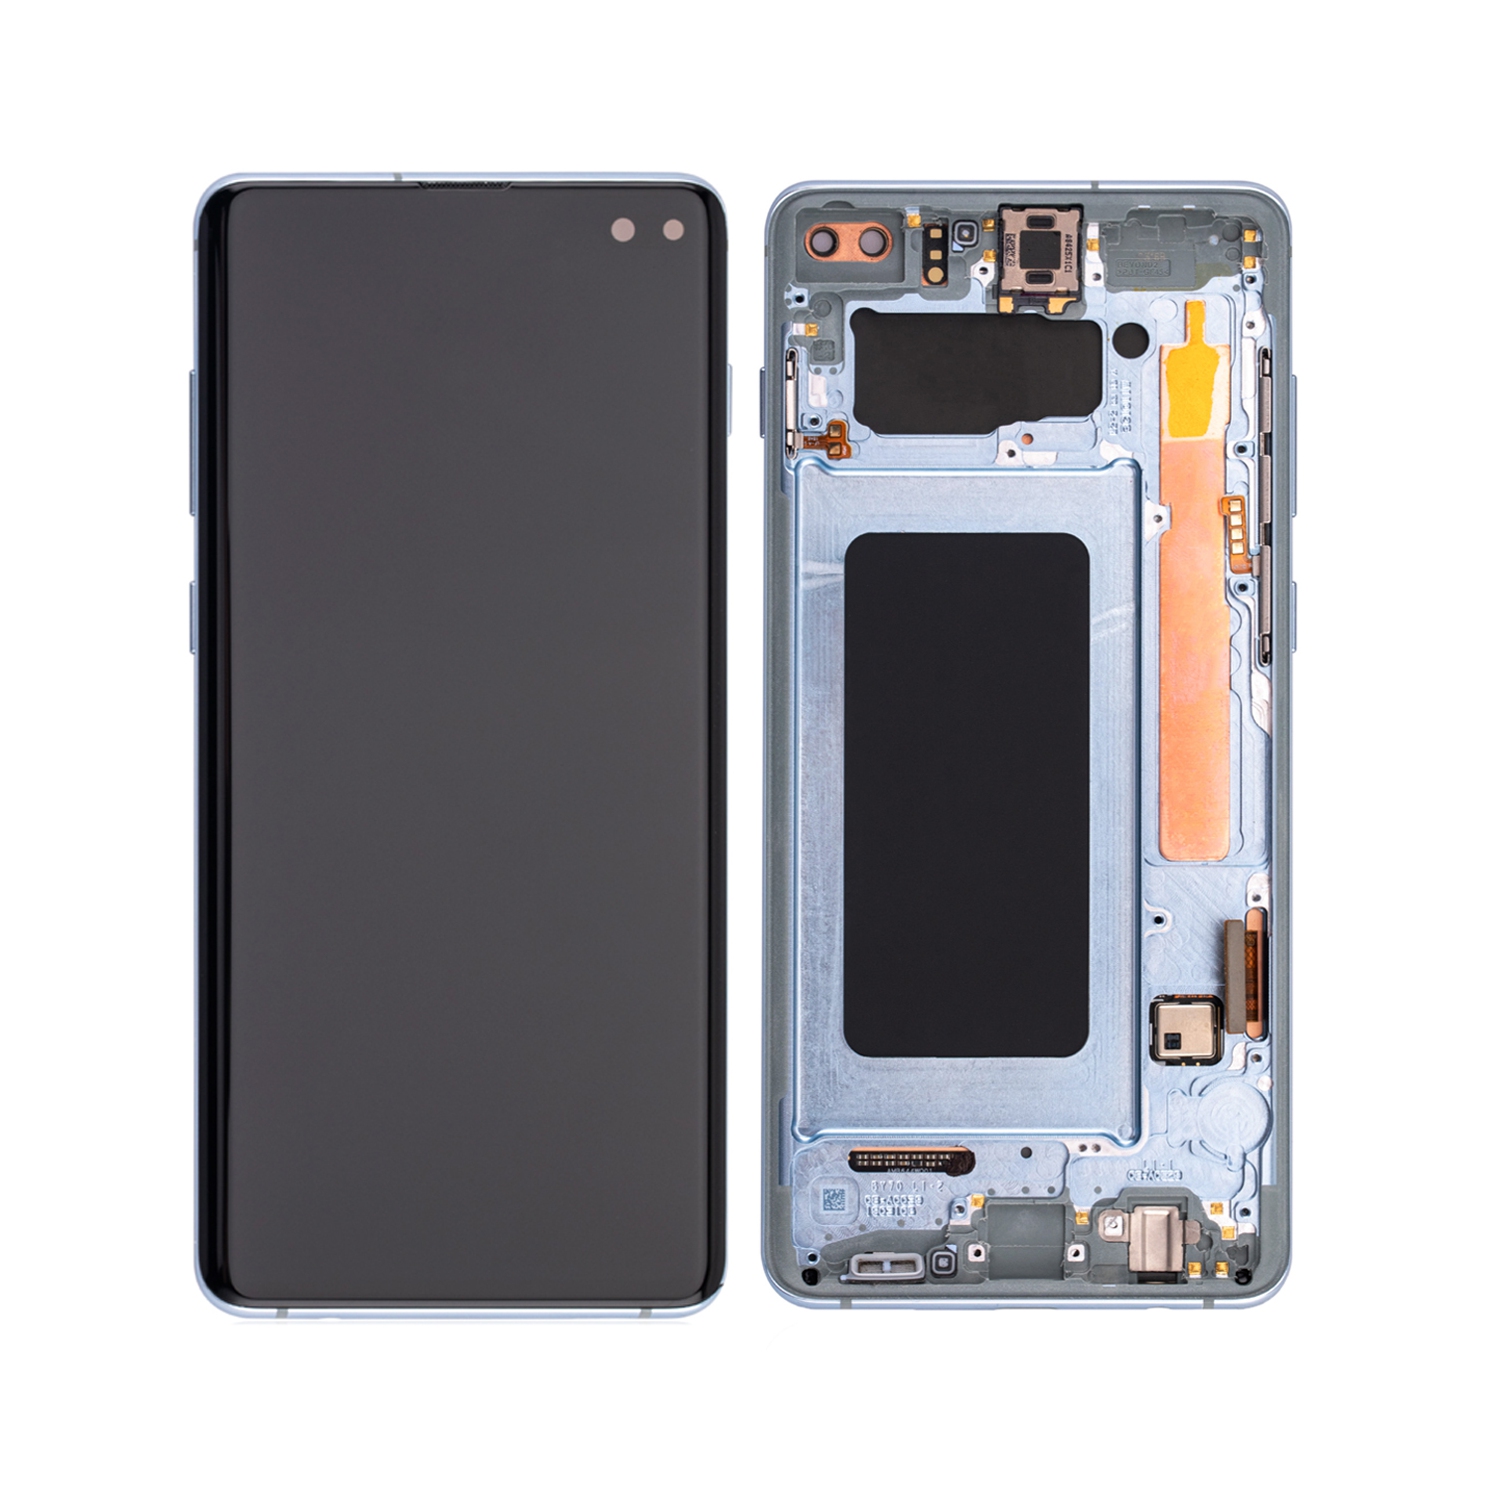 Replacement LCD Display Touch Screen Digitizer Assembly With Frame For Samsung Galaxy S10+ Plus SM-G975W - Prism Blue (Premium)